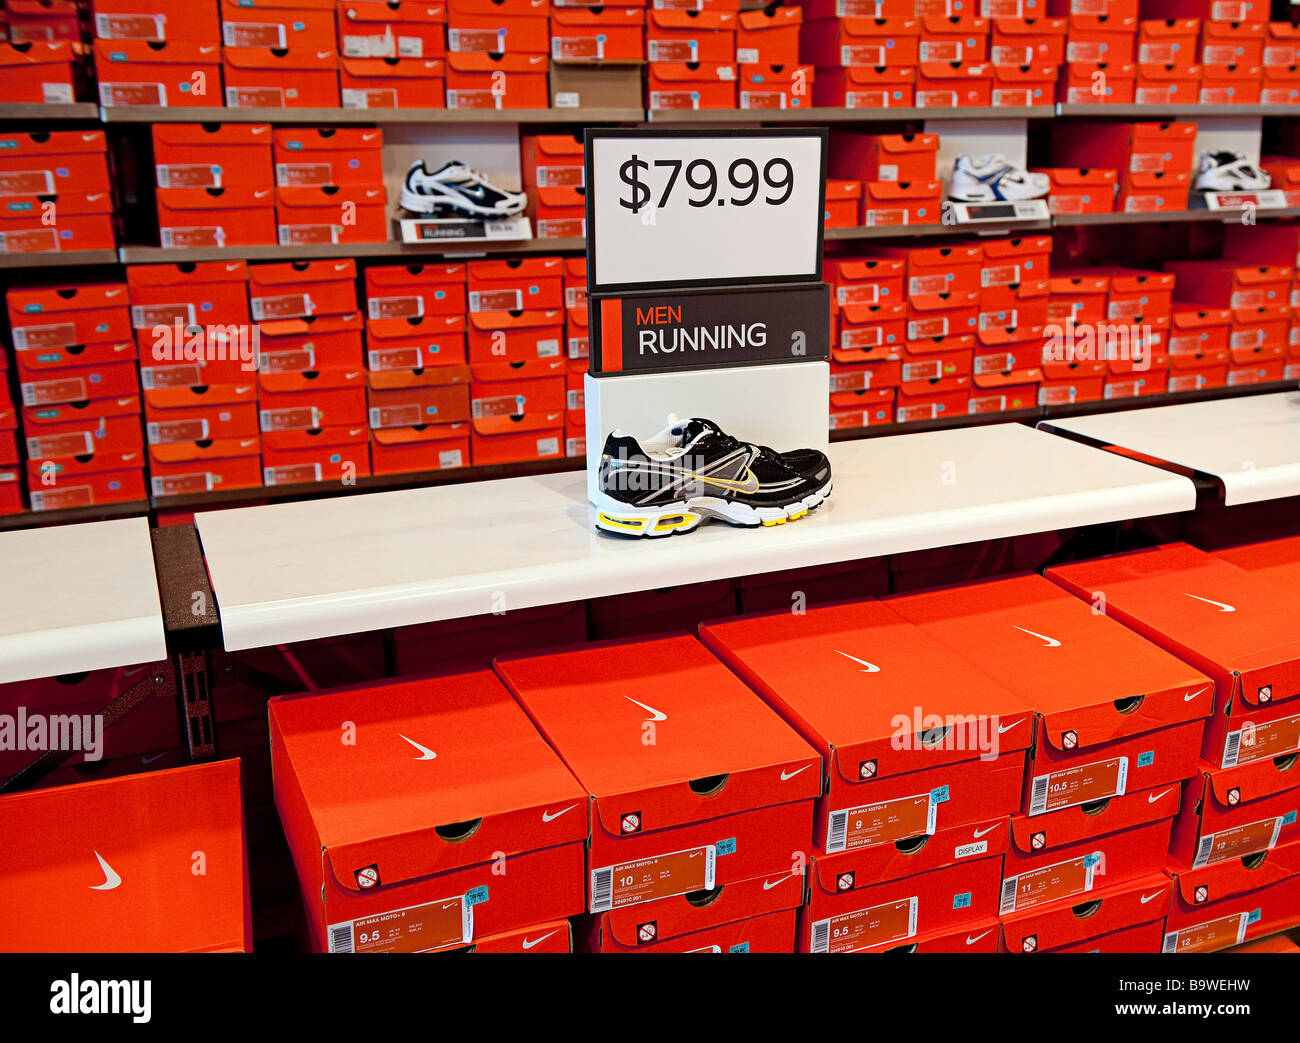 Nike shoe outlet Stock Photo: 23302549 